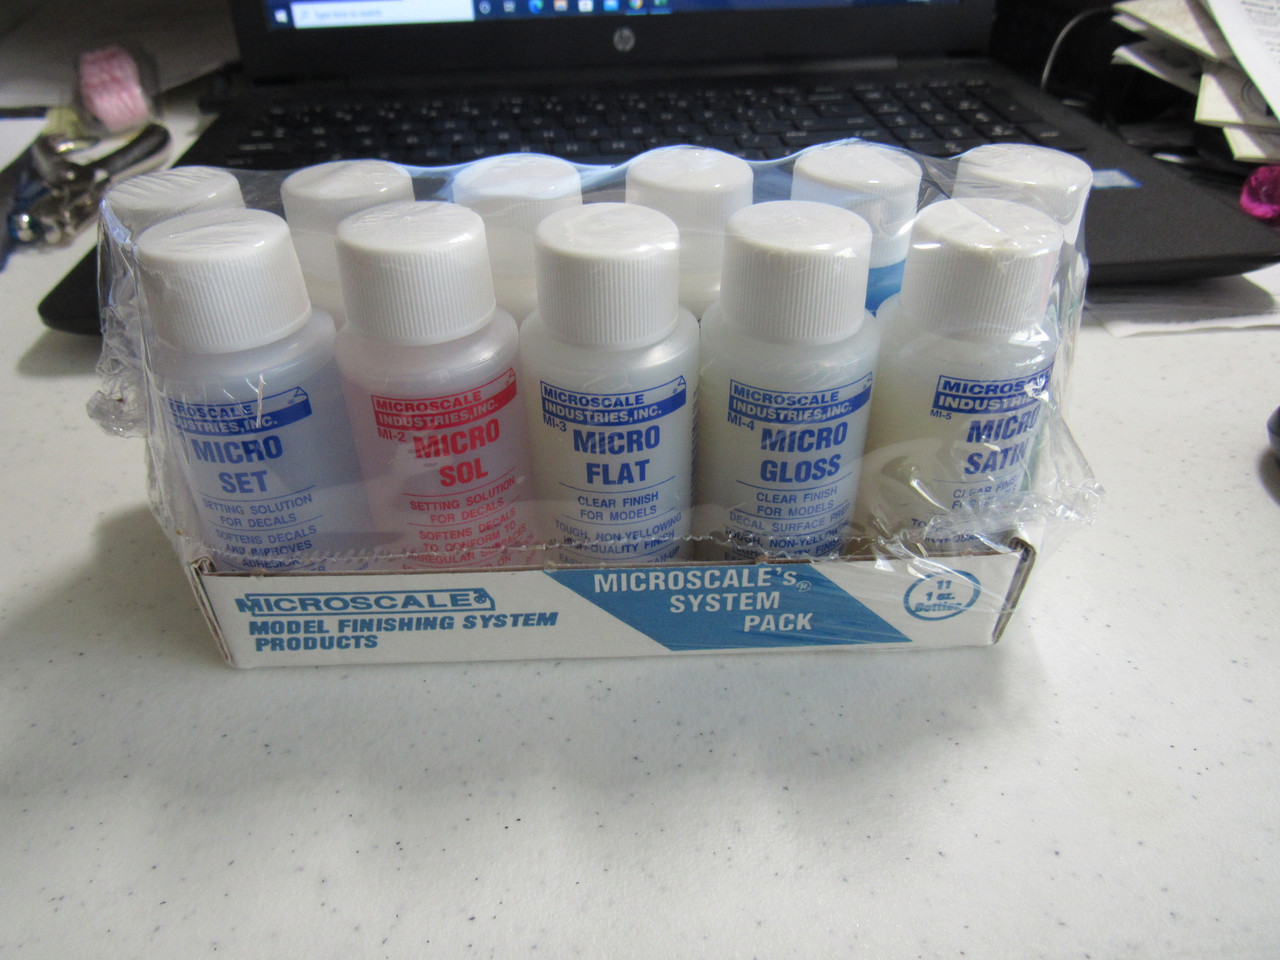 Microscale Decals: Micro Set Solution - 1 oz. bottle (Decal